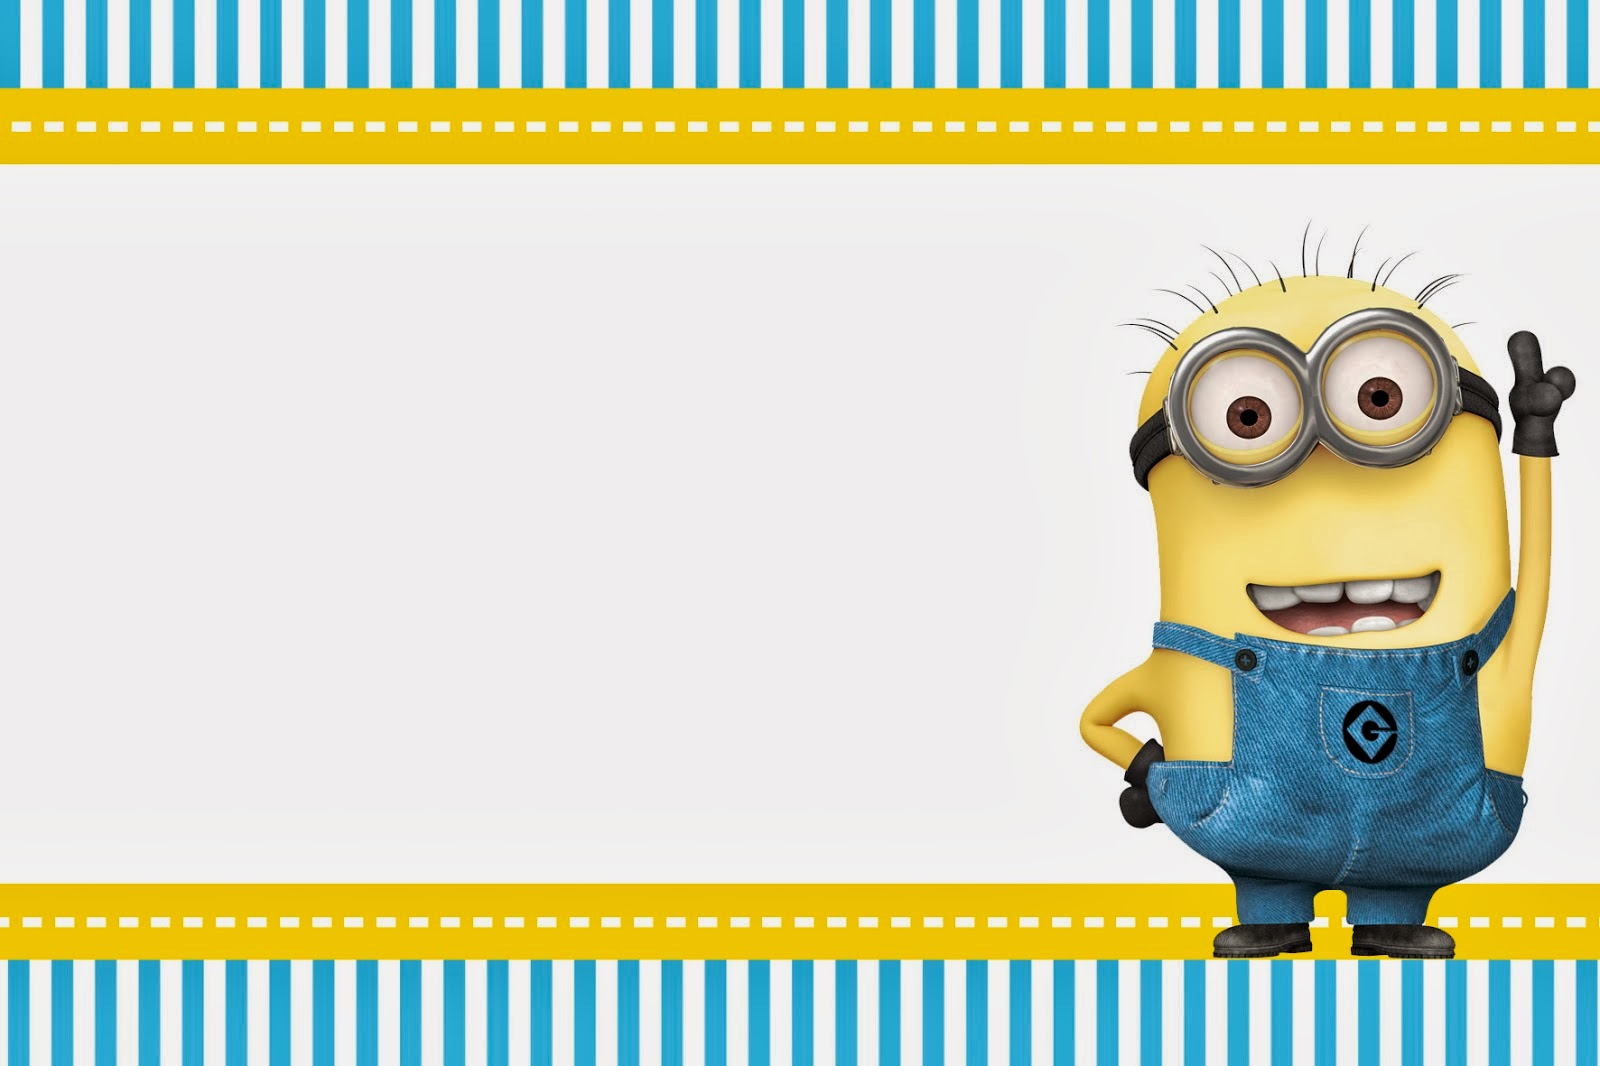 6 Best Images of Despicable Me Birthday Printables - Despicable Me ...